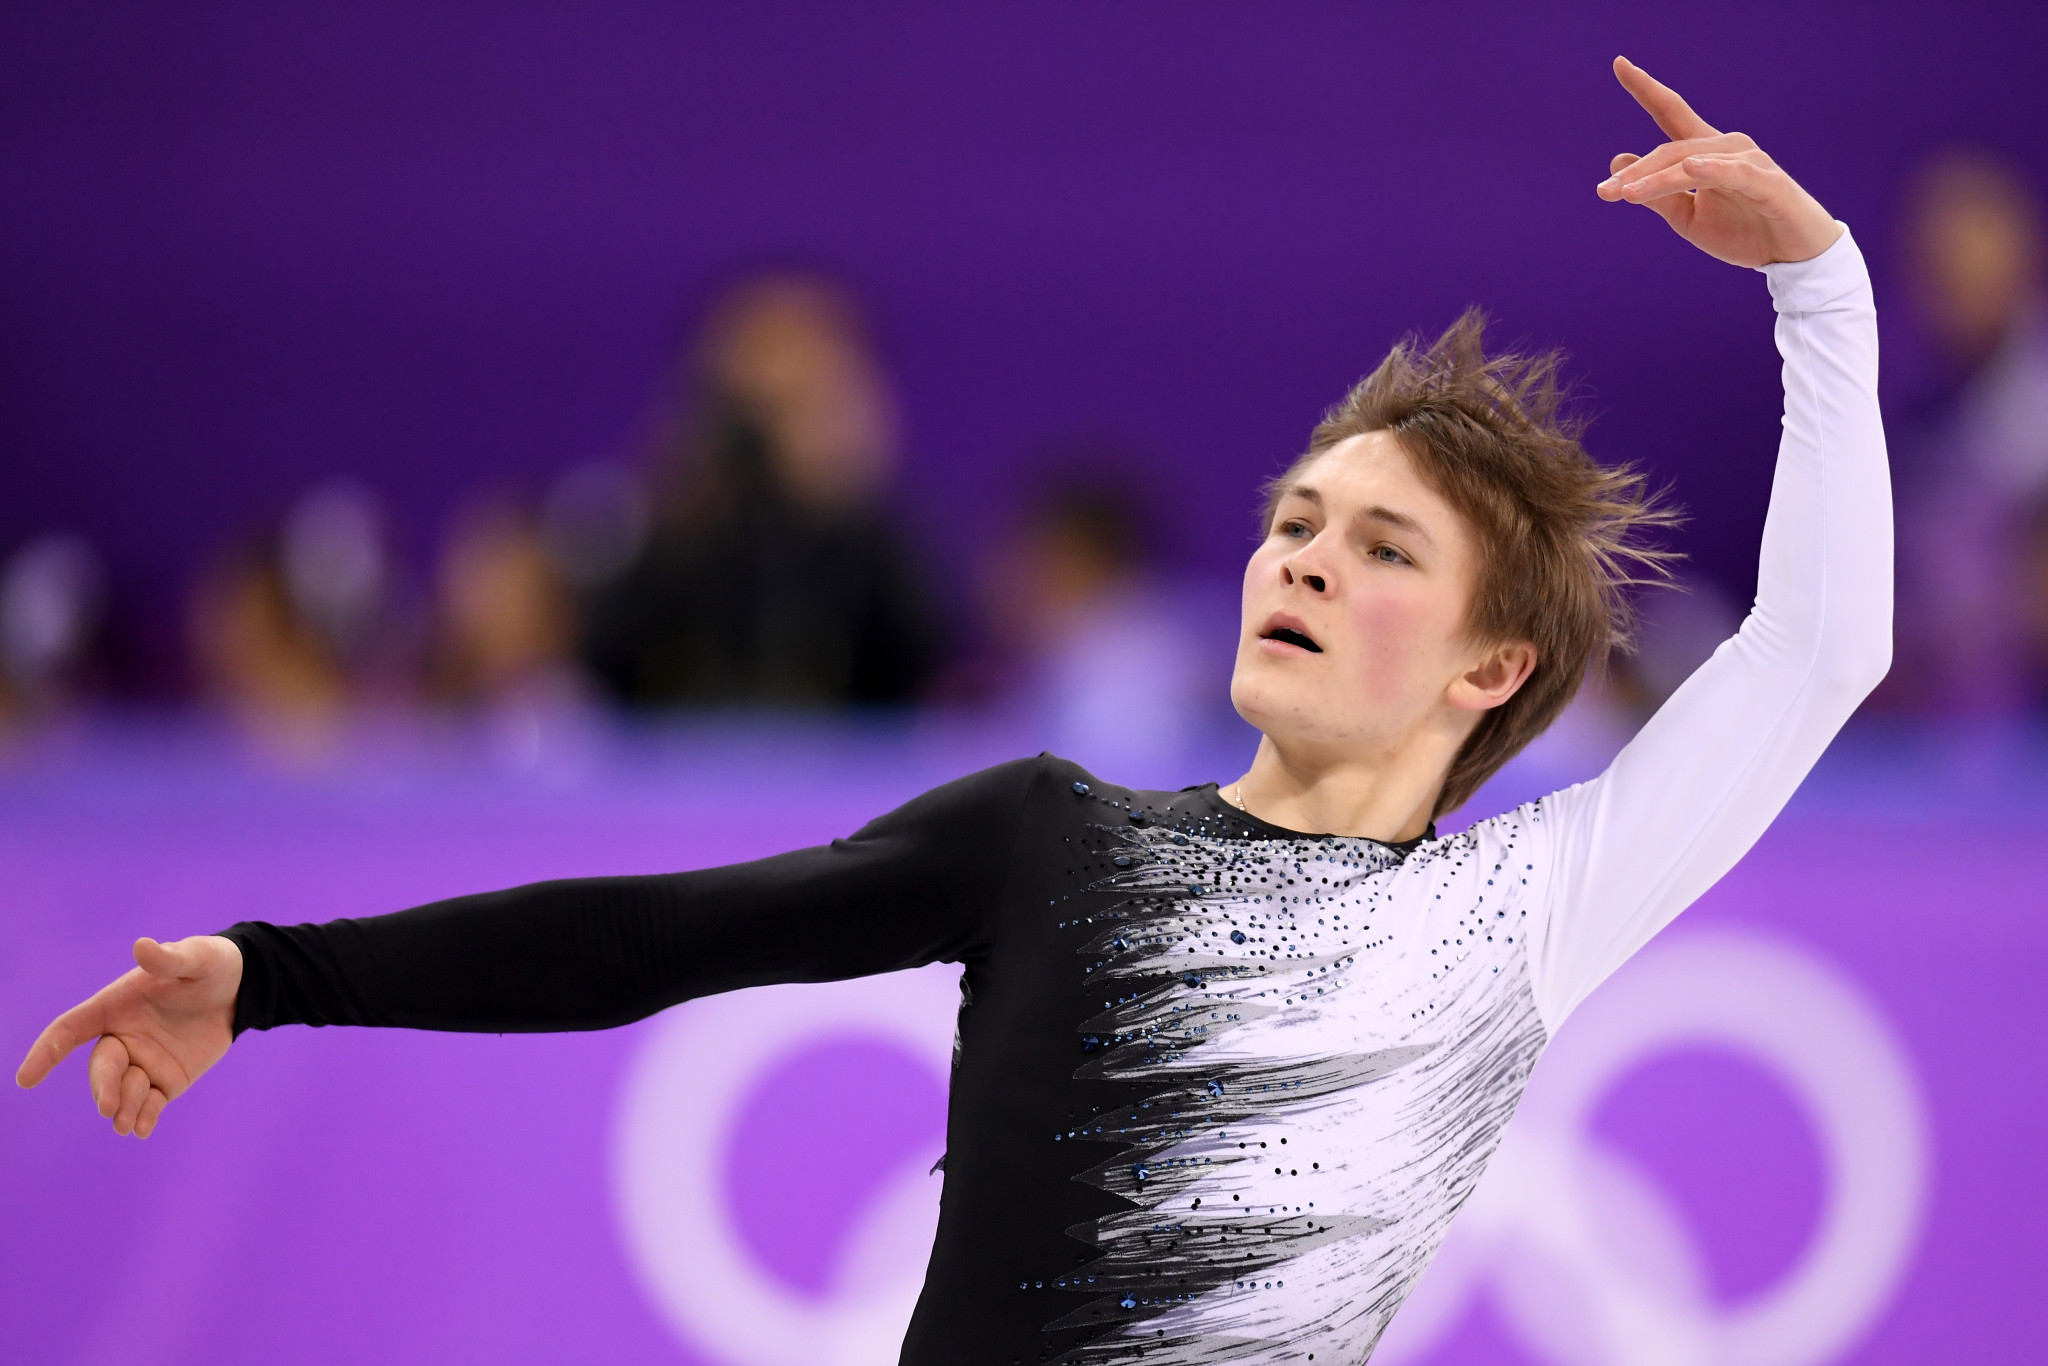 Mikhail Kolyada will be aiming for a medal in the men's competition ©Getty Images